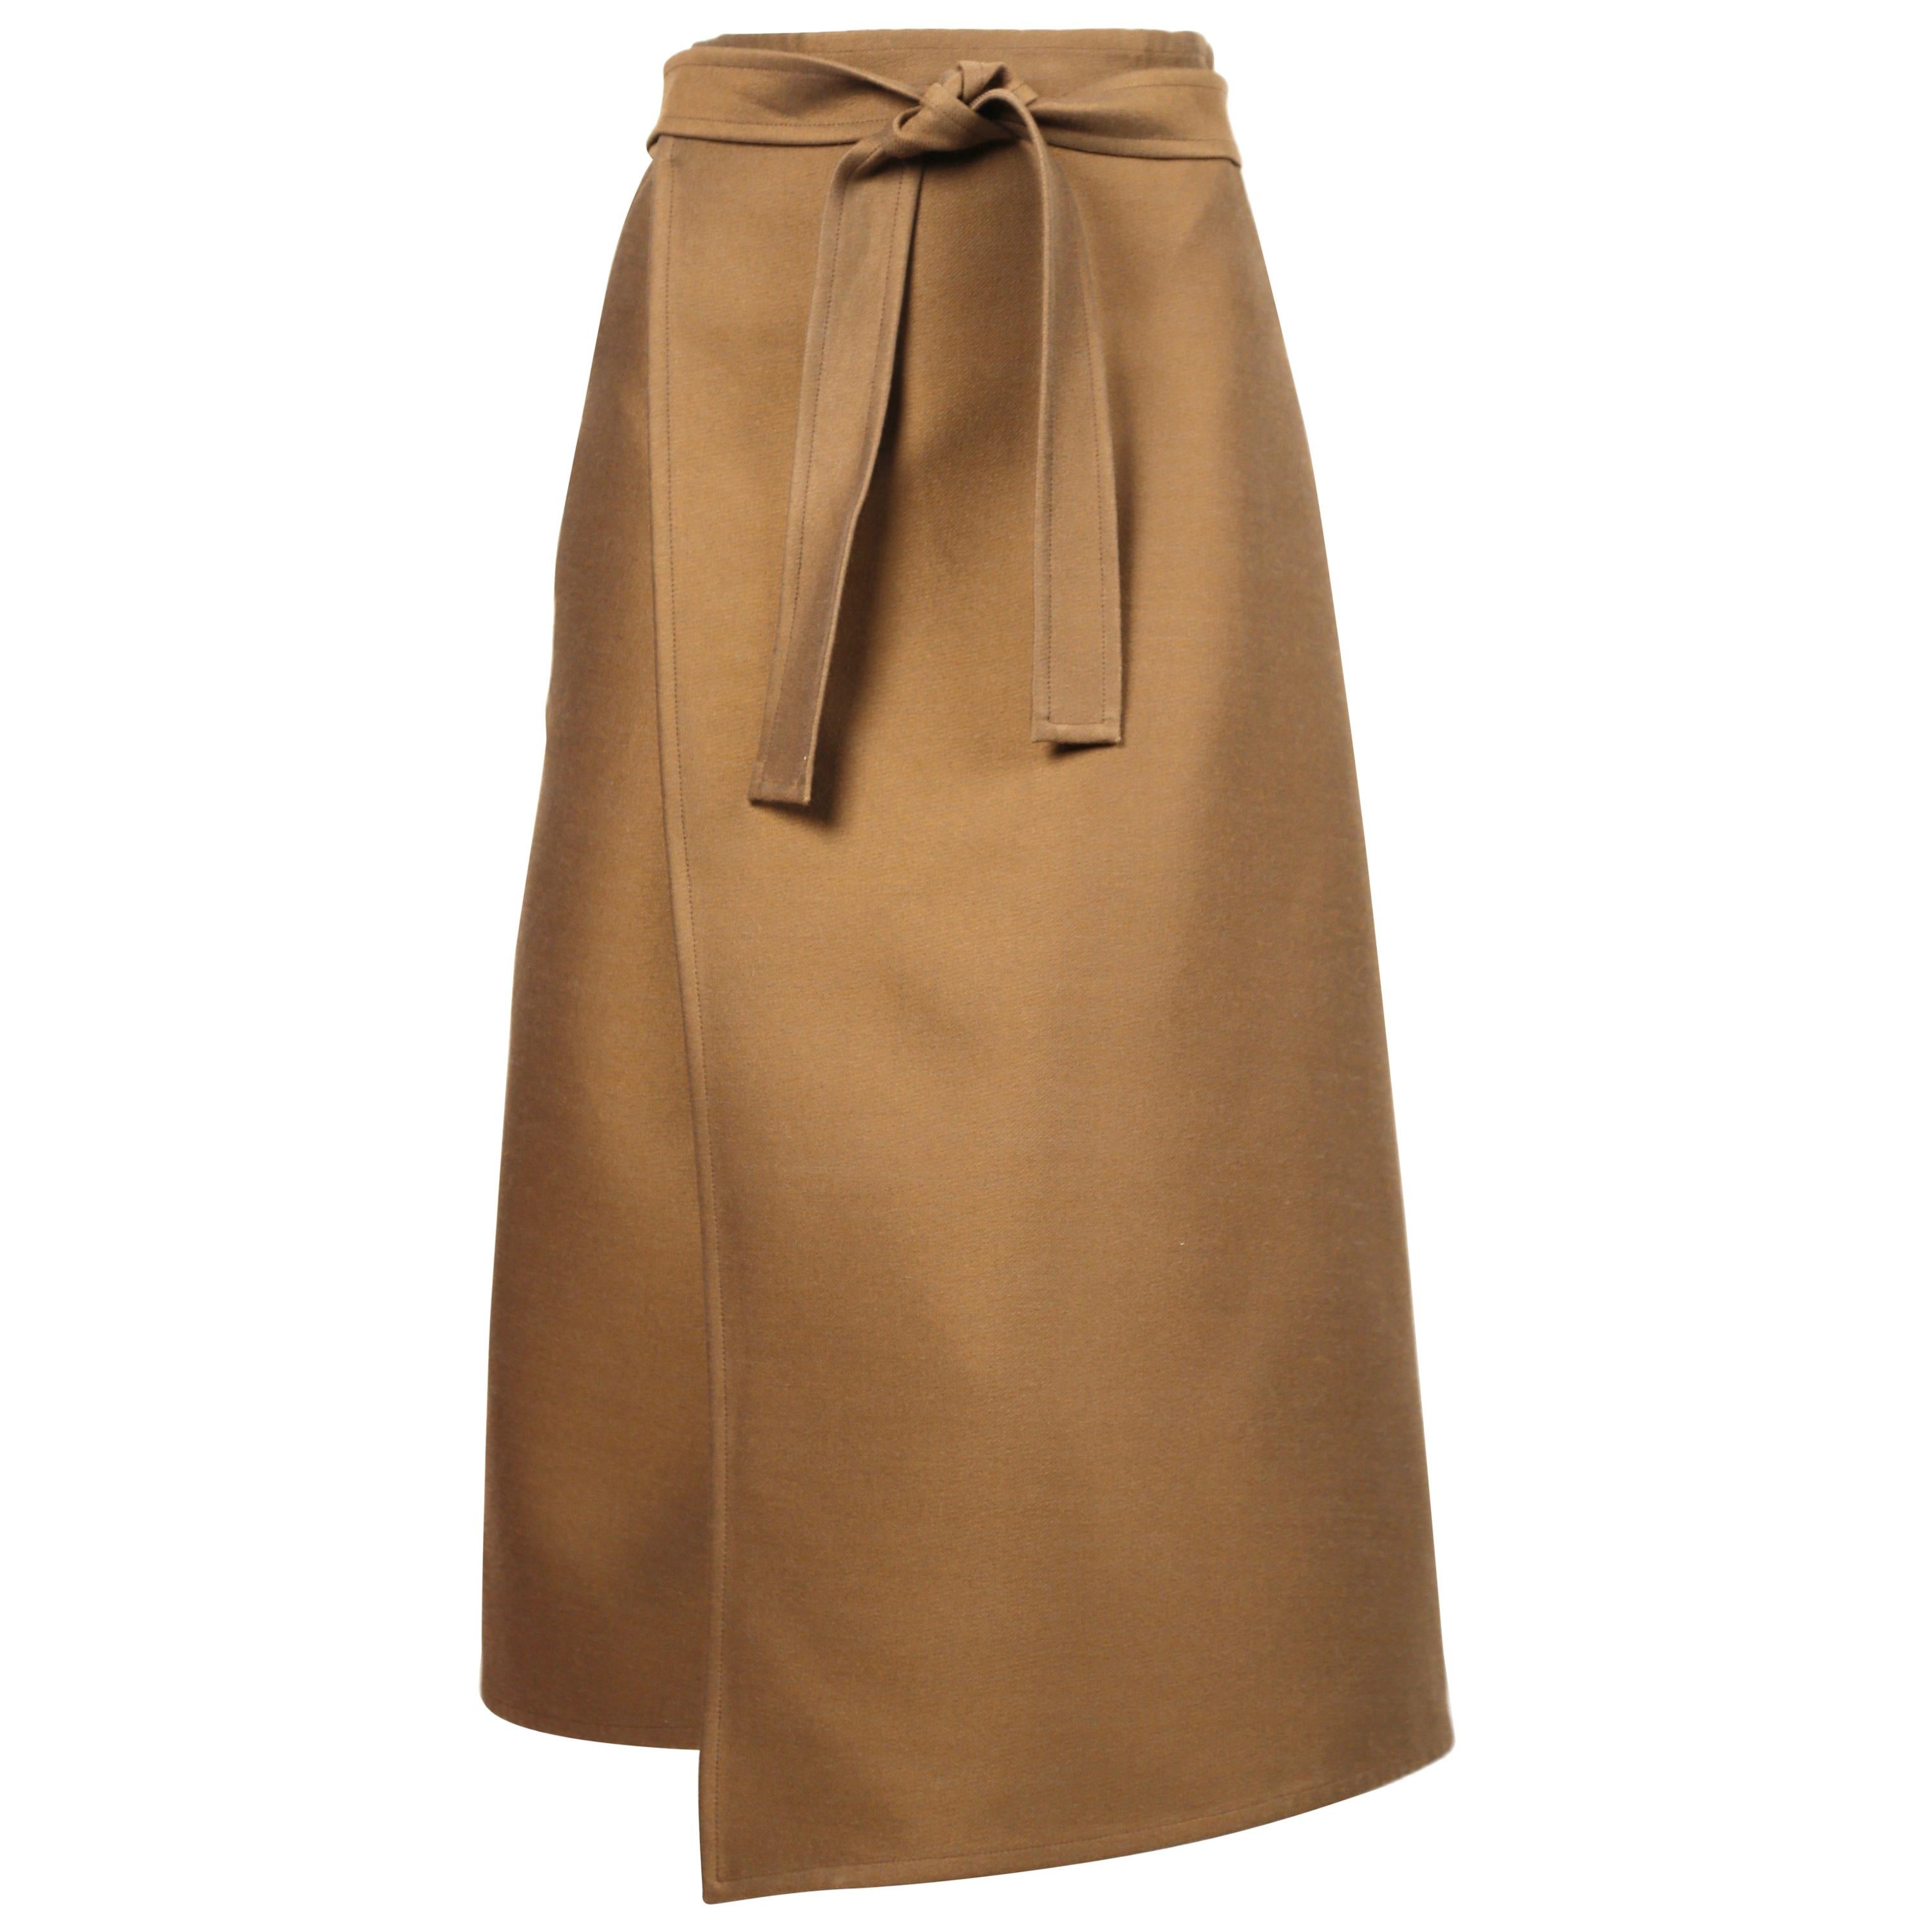 CELINE by PHOEBE PHILO tan wrap skirt with pockets